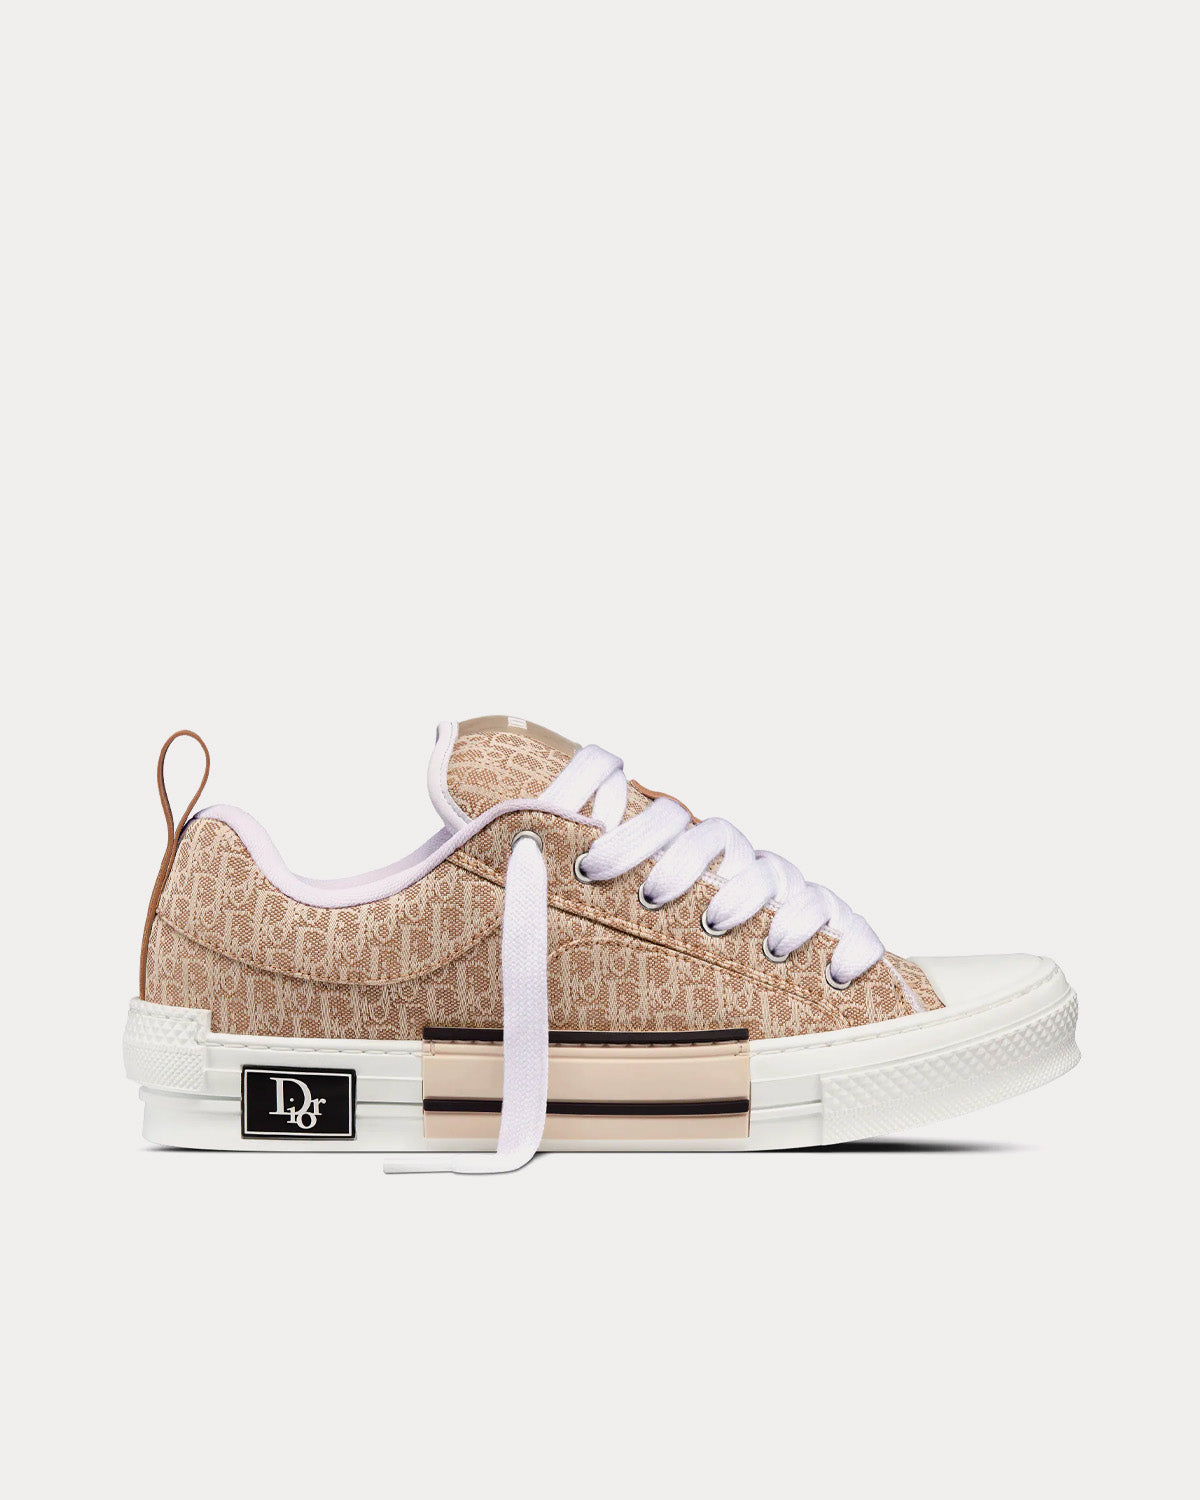 Dior x ERL - B23 Skater Beige Dior Oblique Jacquard Low Top Sneakers